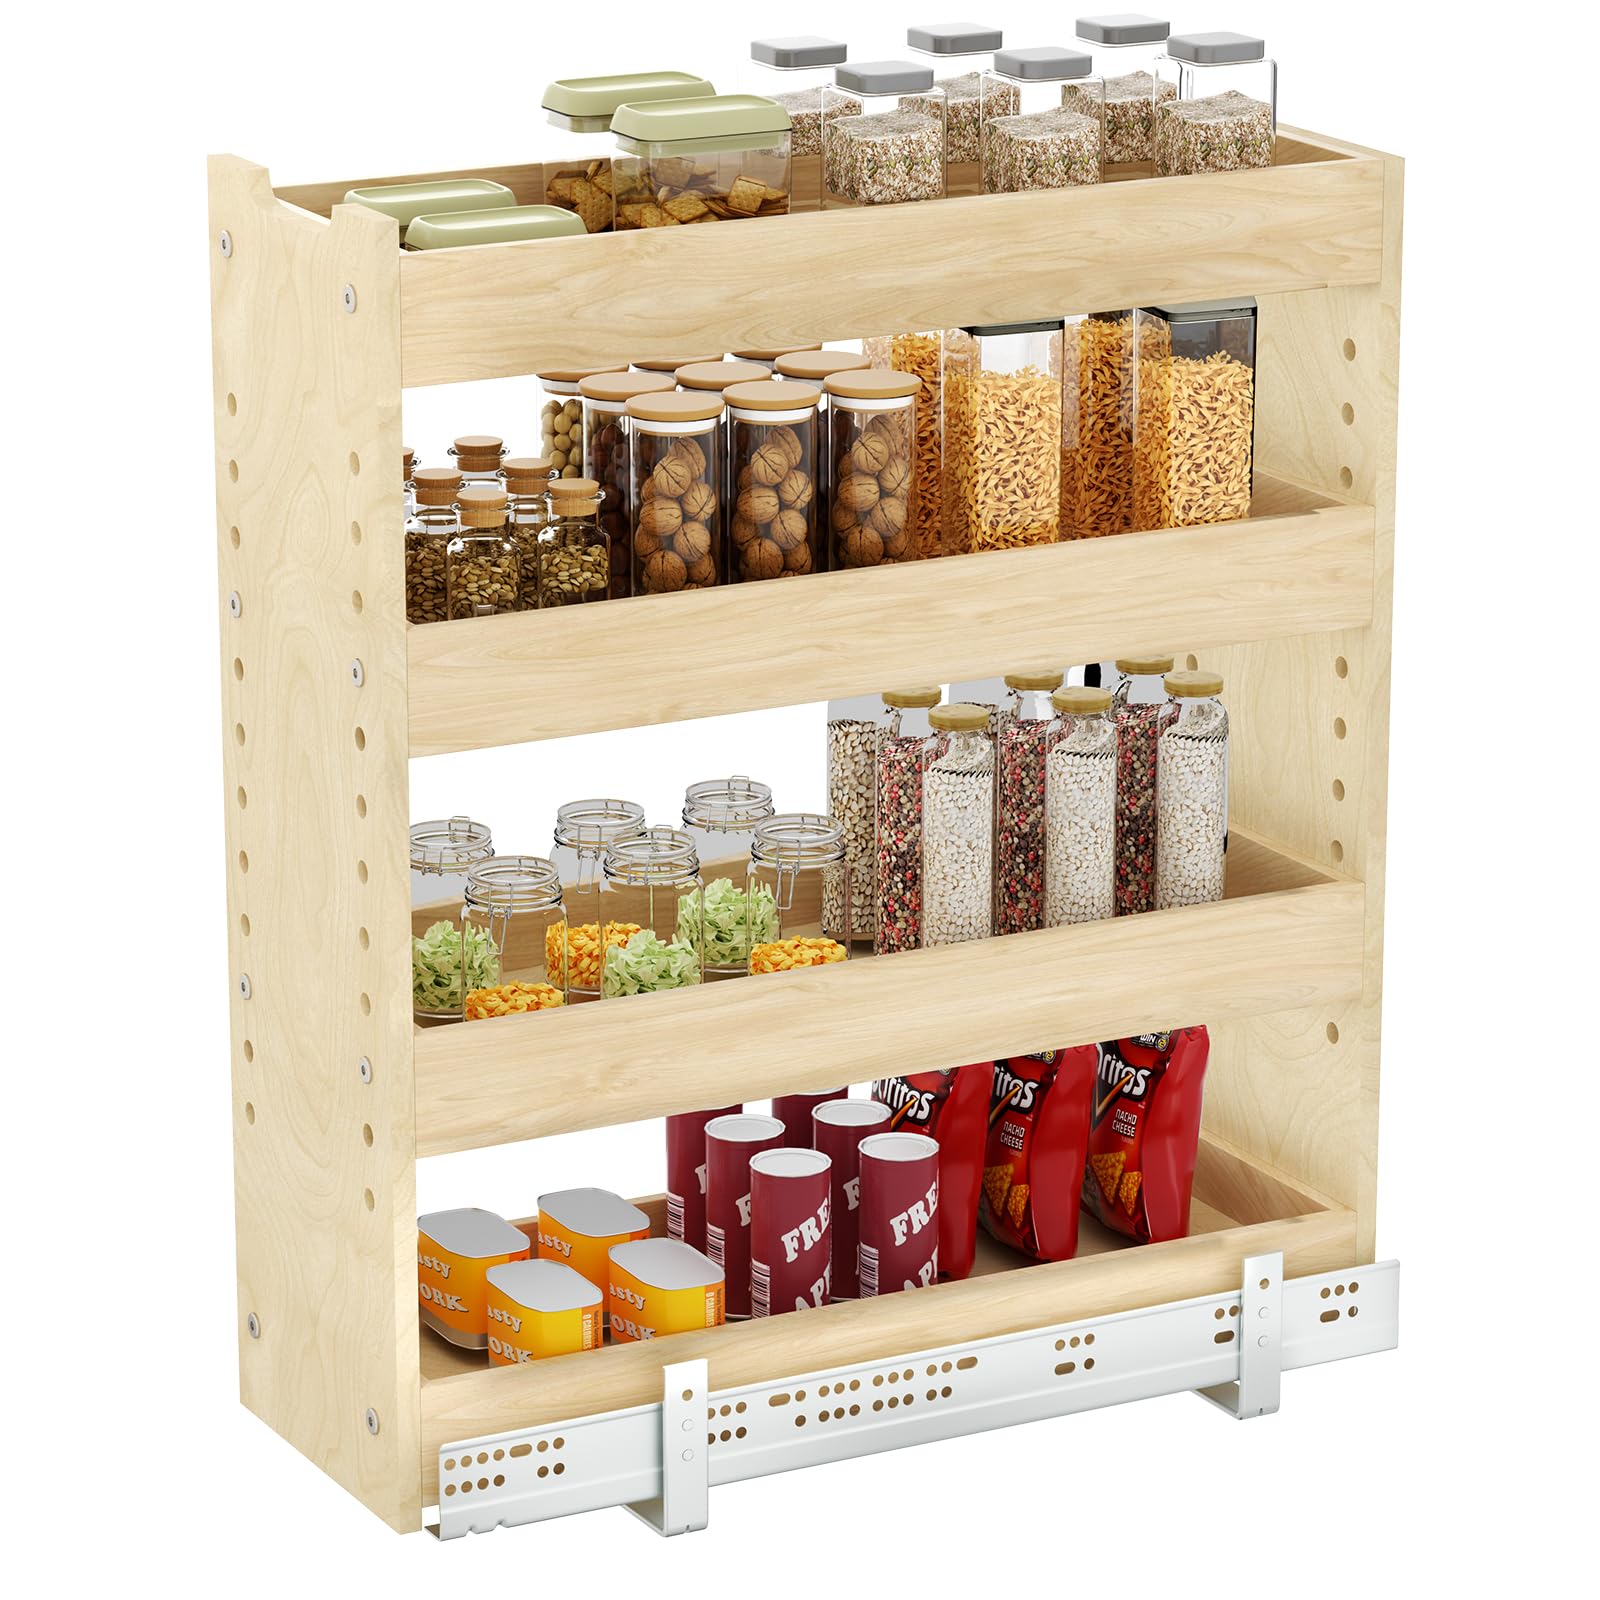 LOVMOR Adjustable Pull Out Cabinet Organizer 7½” W x 24½”H 4-Tier Narrow Cabinet Drawers Slide Out with Soft Close Wood Spice Rack for Narrow Cabinet